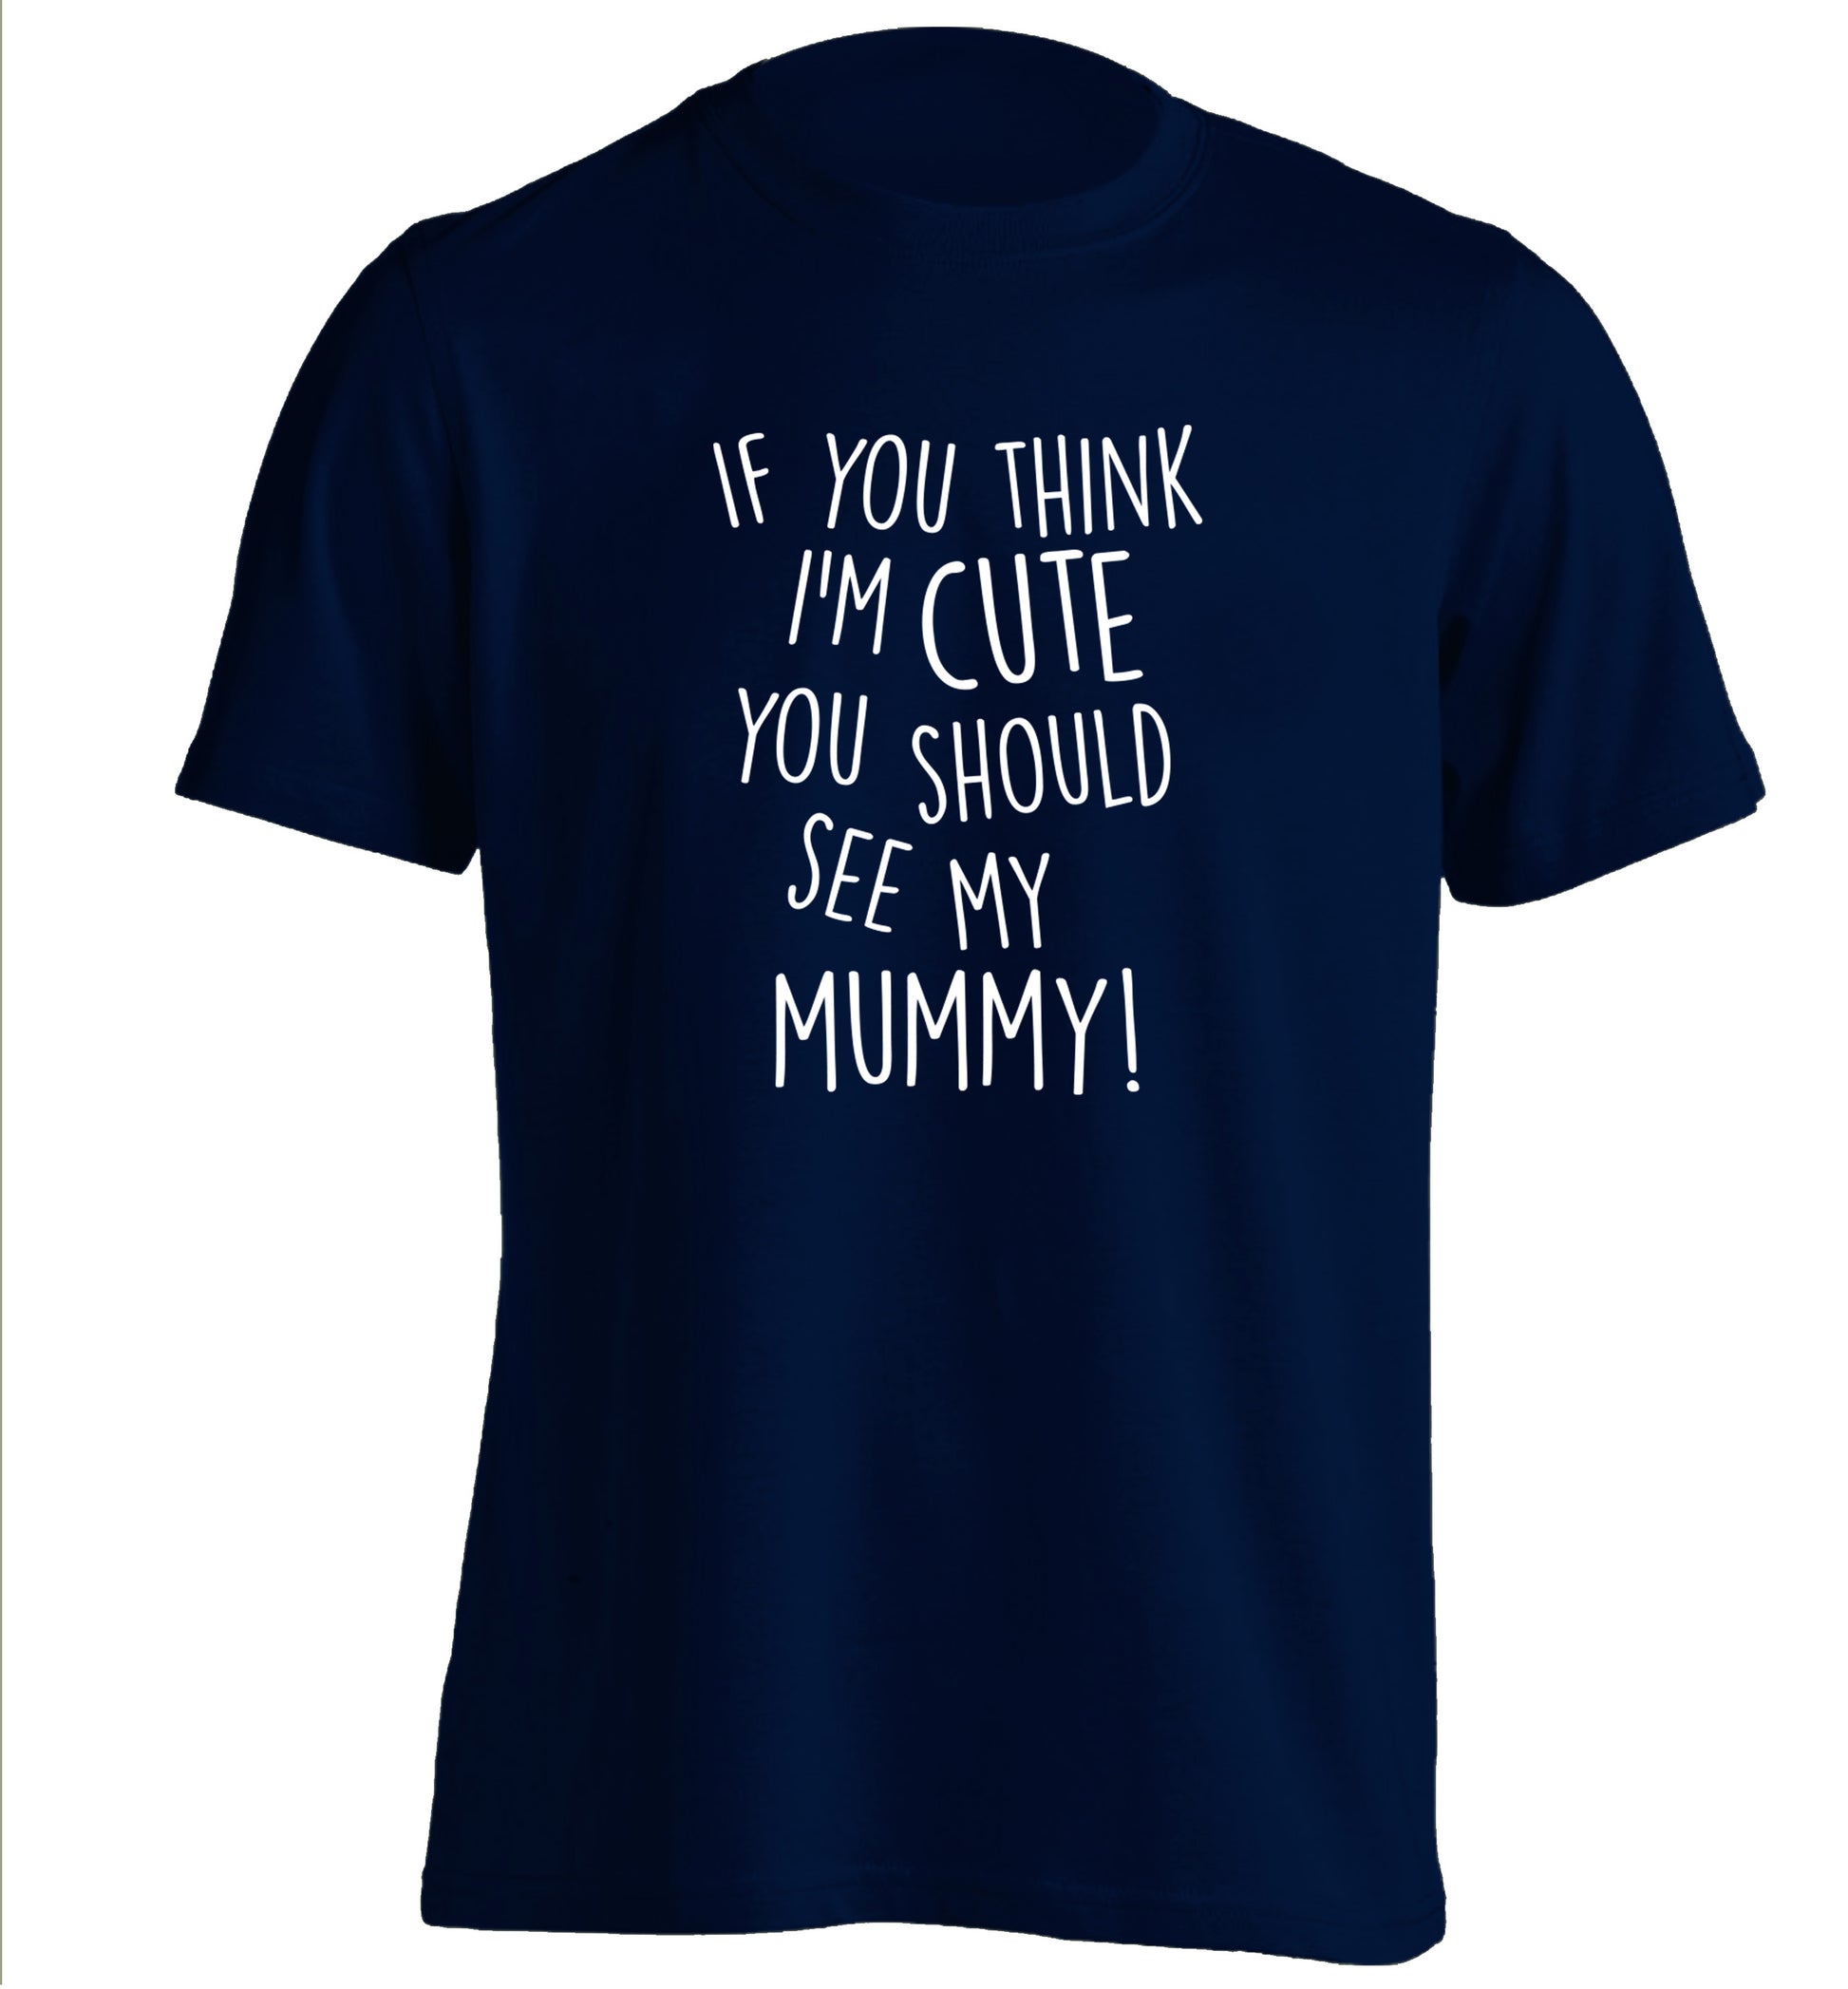 If you think I'm cute you should see my mummy adults unisex navy Tshirt 2XL